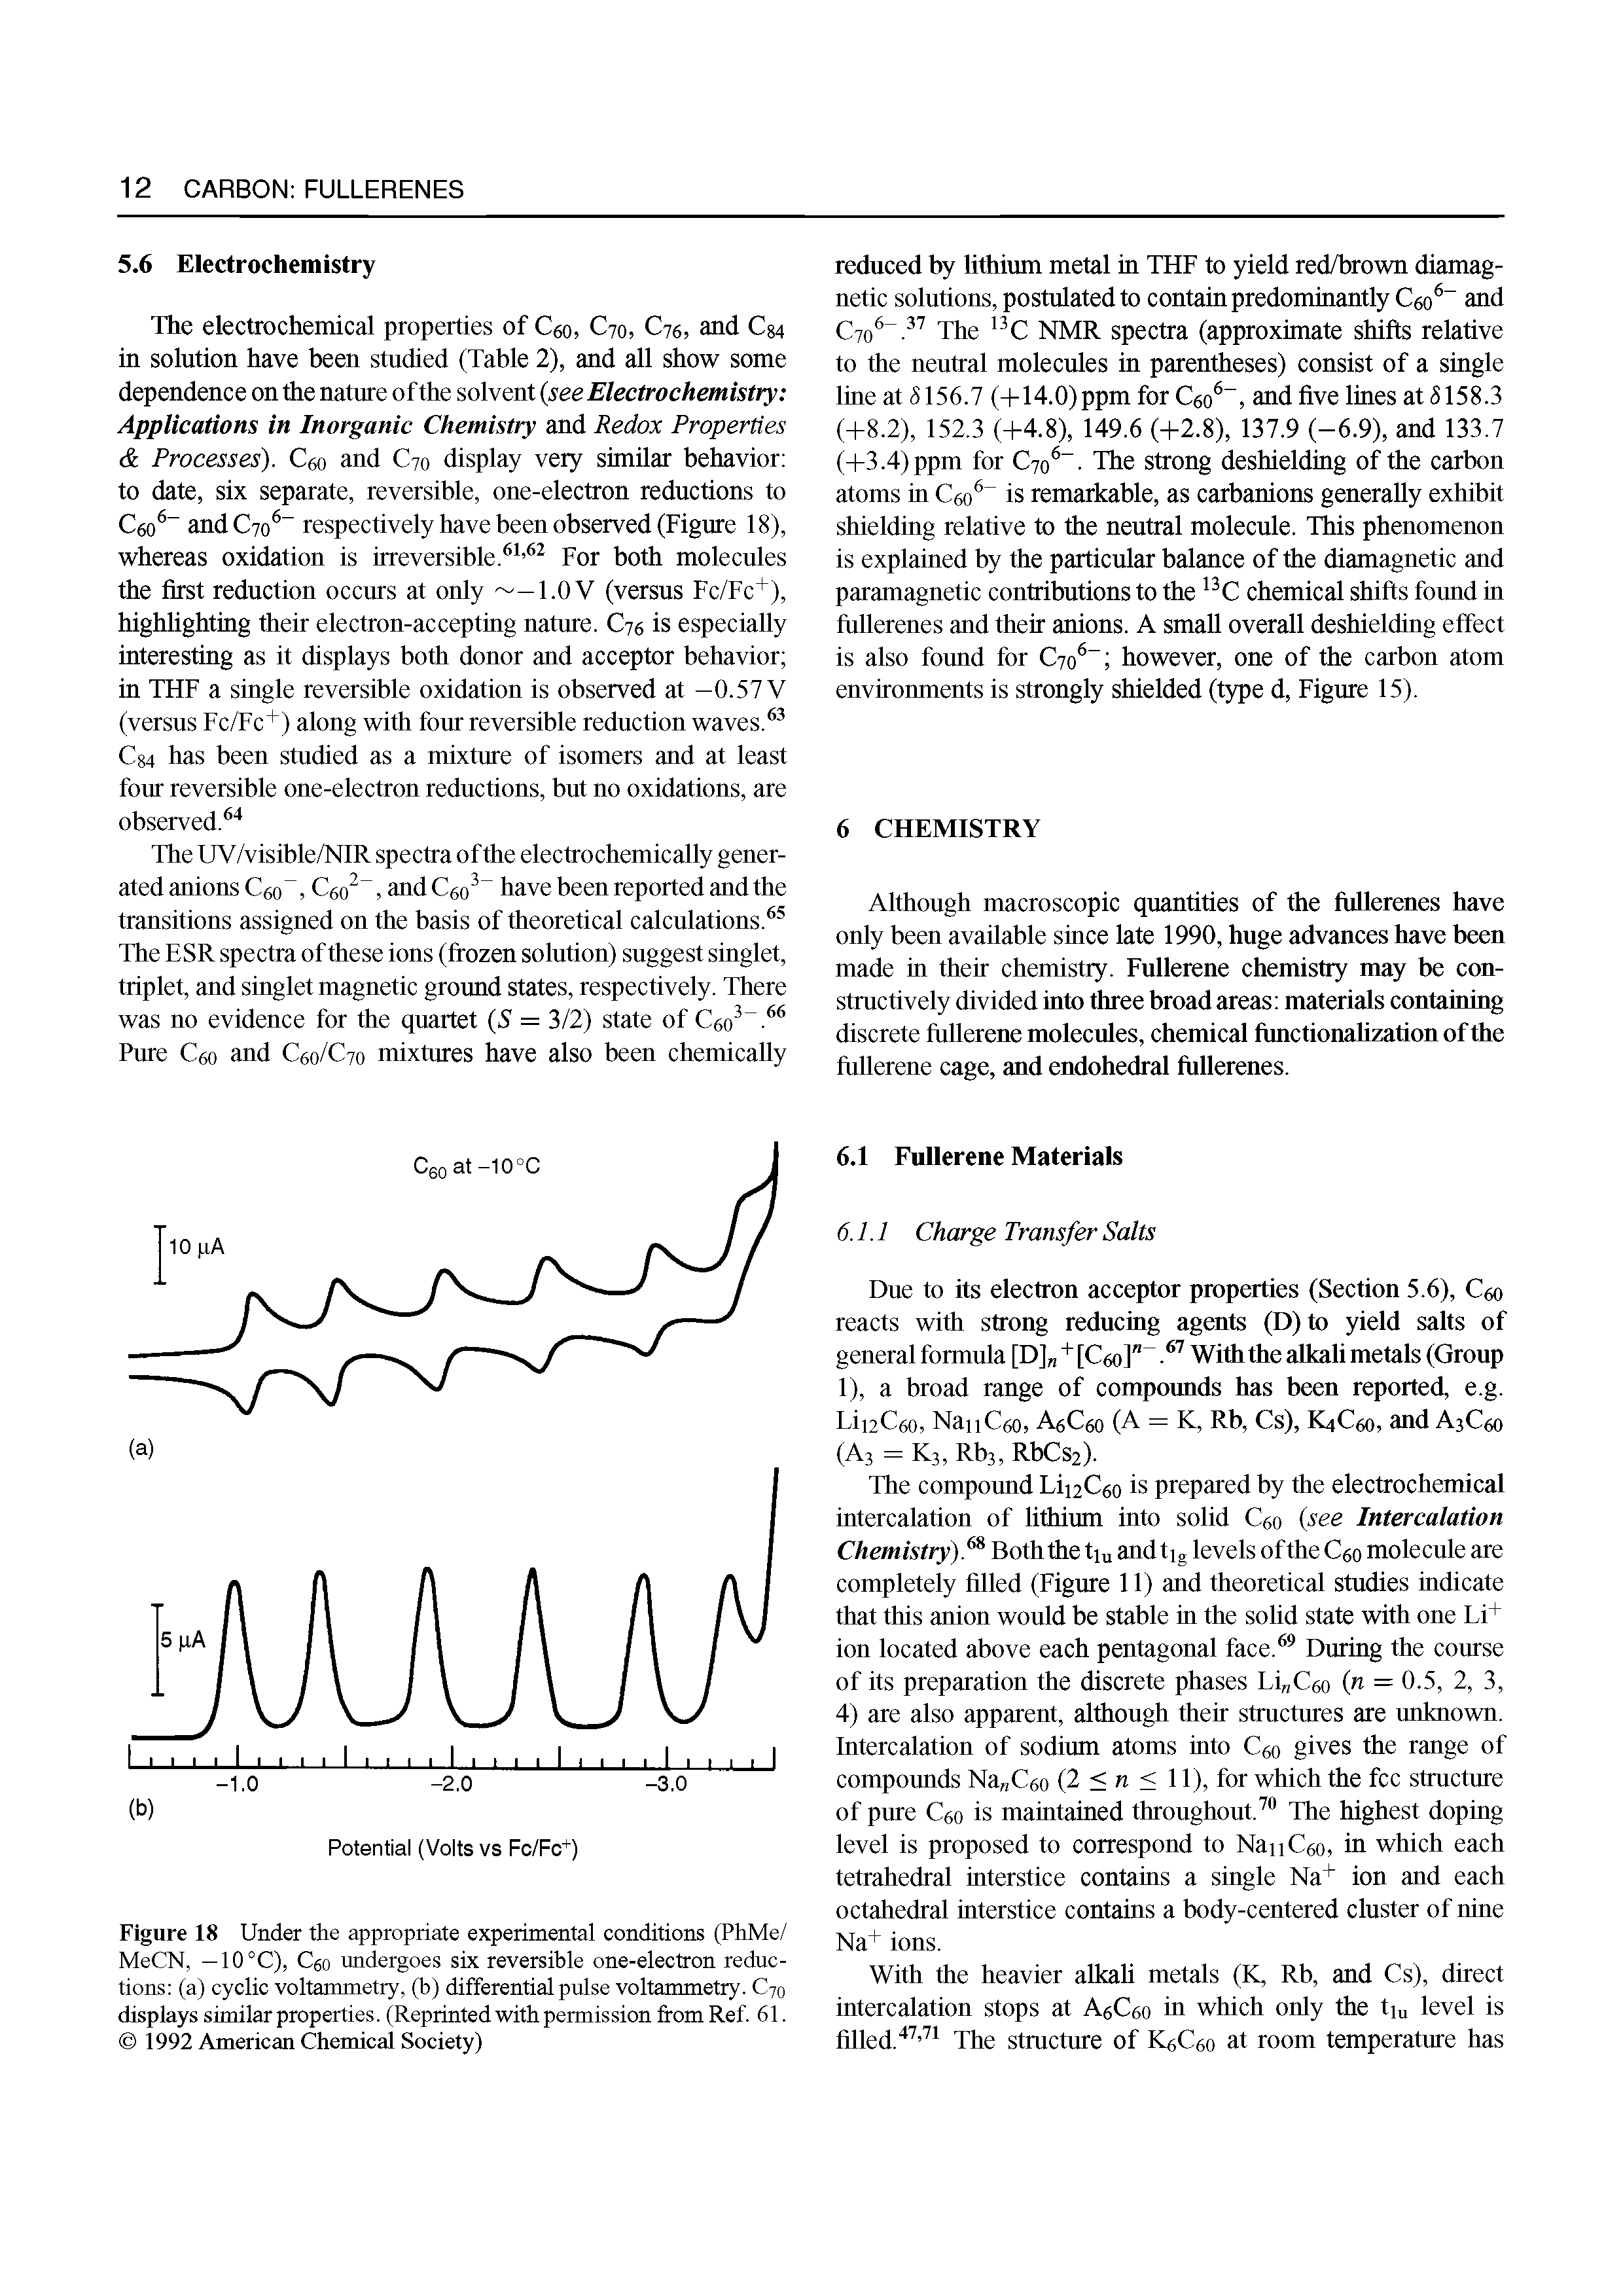 Figure 18 Under the appropriate experimental conditions (PhMe/ MeCN, — 10°C), Ceo undergoes six reversible one-electron reductions (a) cyclic voltammetry, (b) differential pulse voltammetry. C70 displays similar properties. (Reprinted with permission from Ref. 61. 1992 American Chemical Society)...